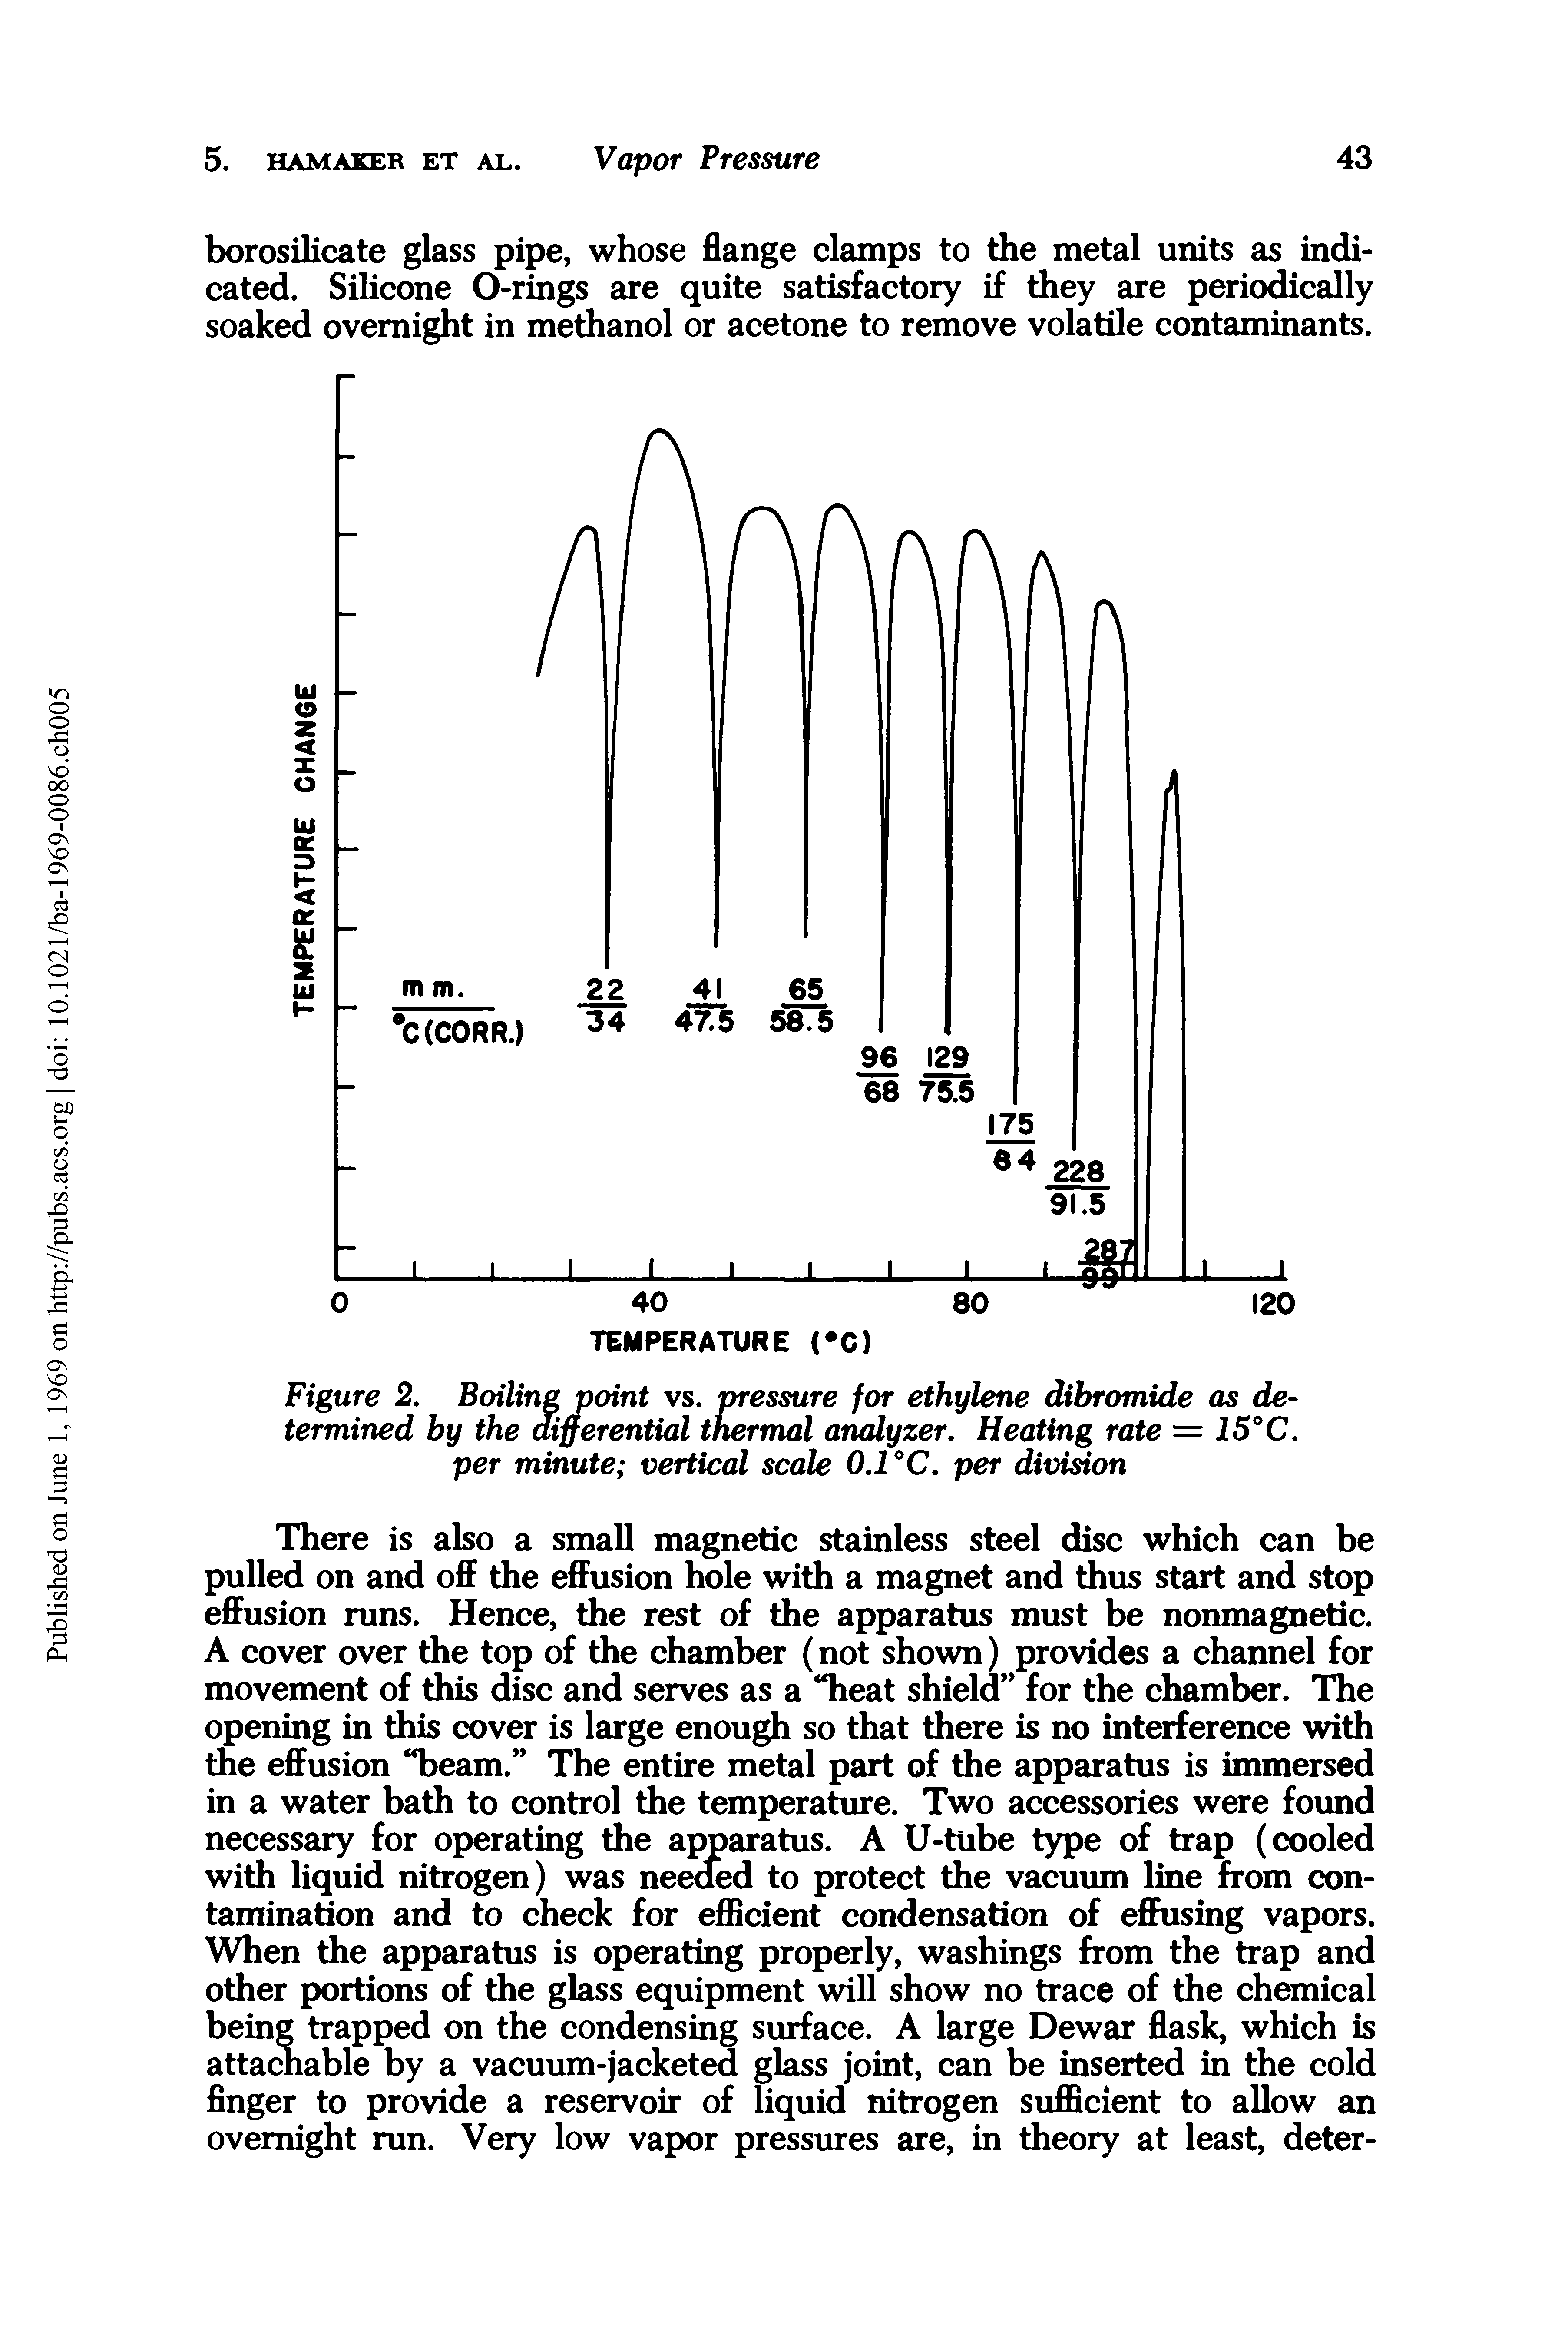 Figure 2. Boiling point vs. pressure for ethylene dibromide as determined by the differential thermal analyzer. Heating rate = 15° C. per minute vertical scale 0.1 °C. per division...